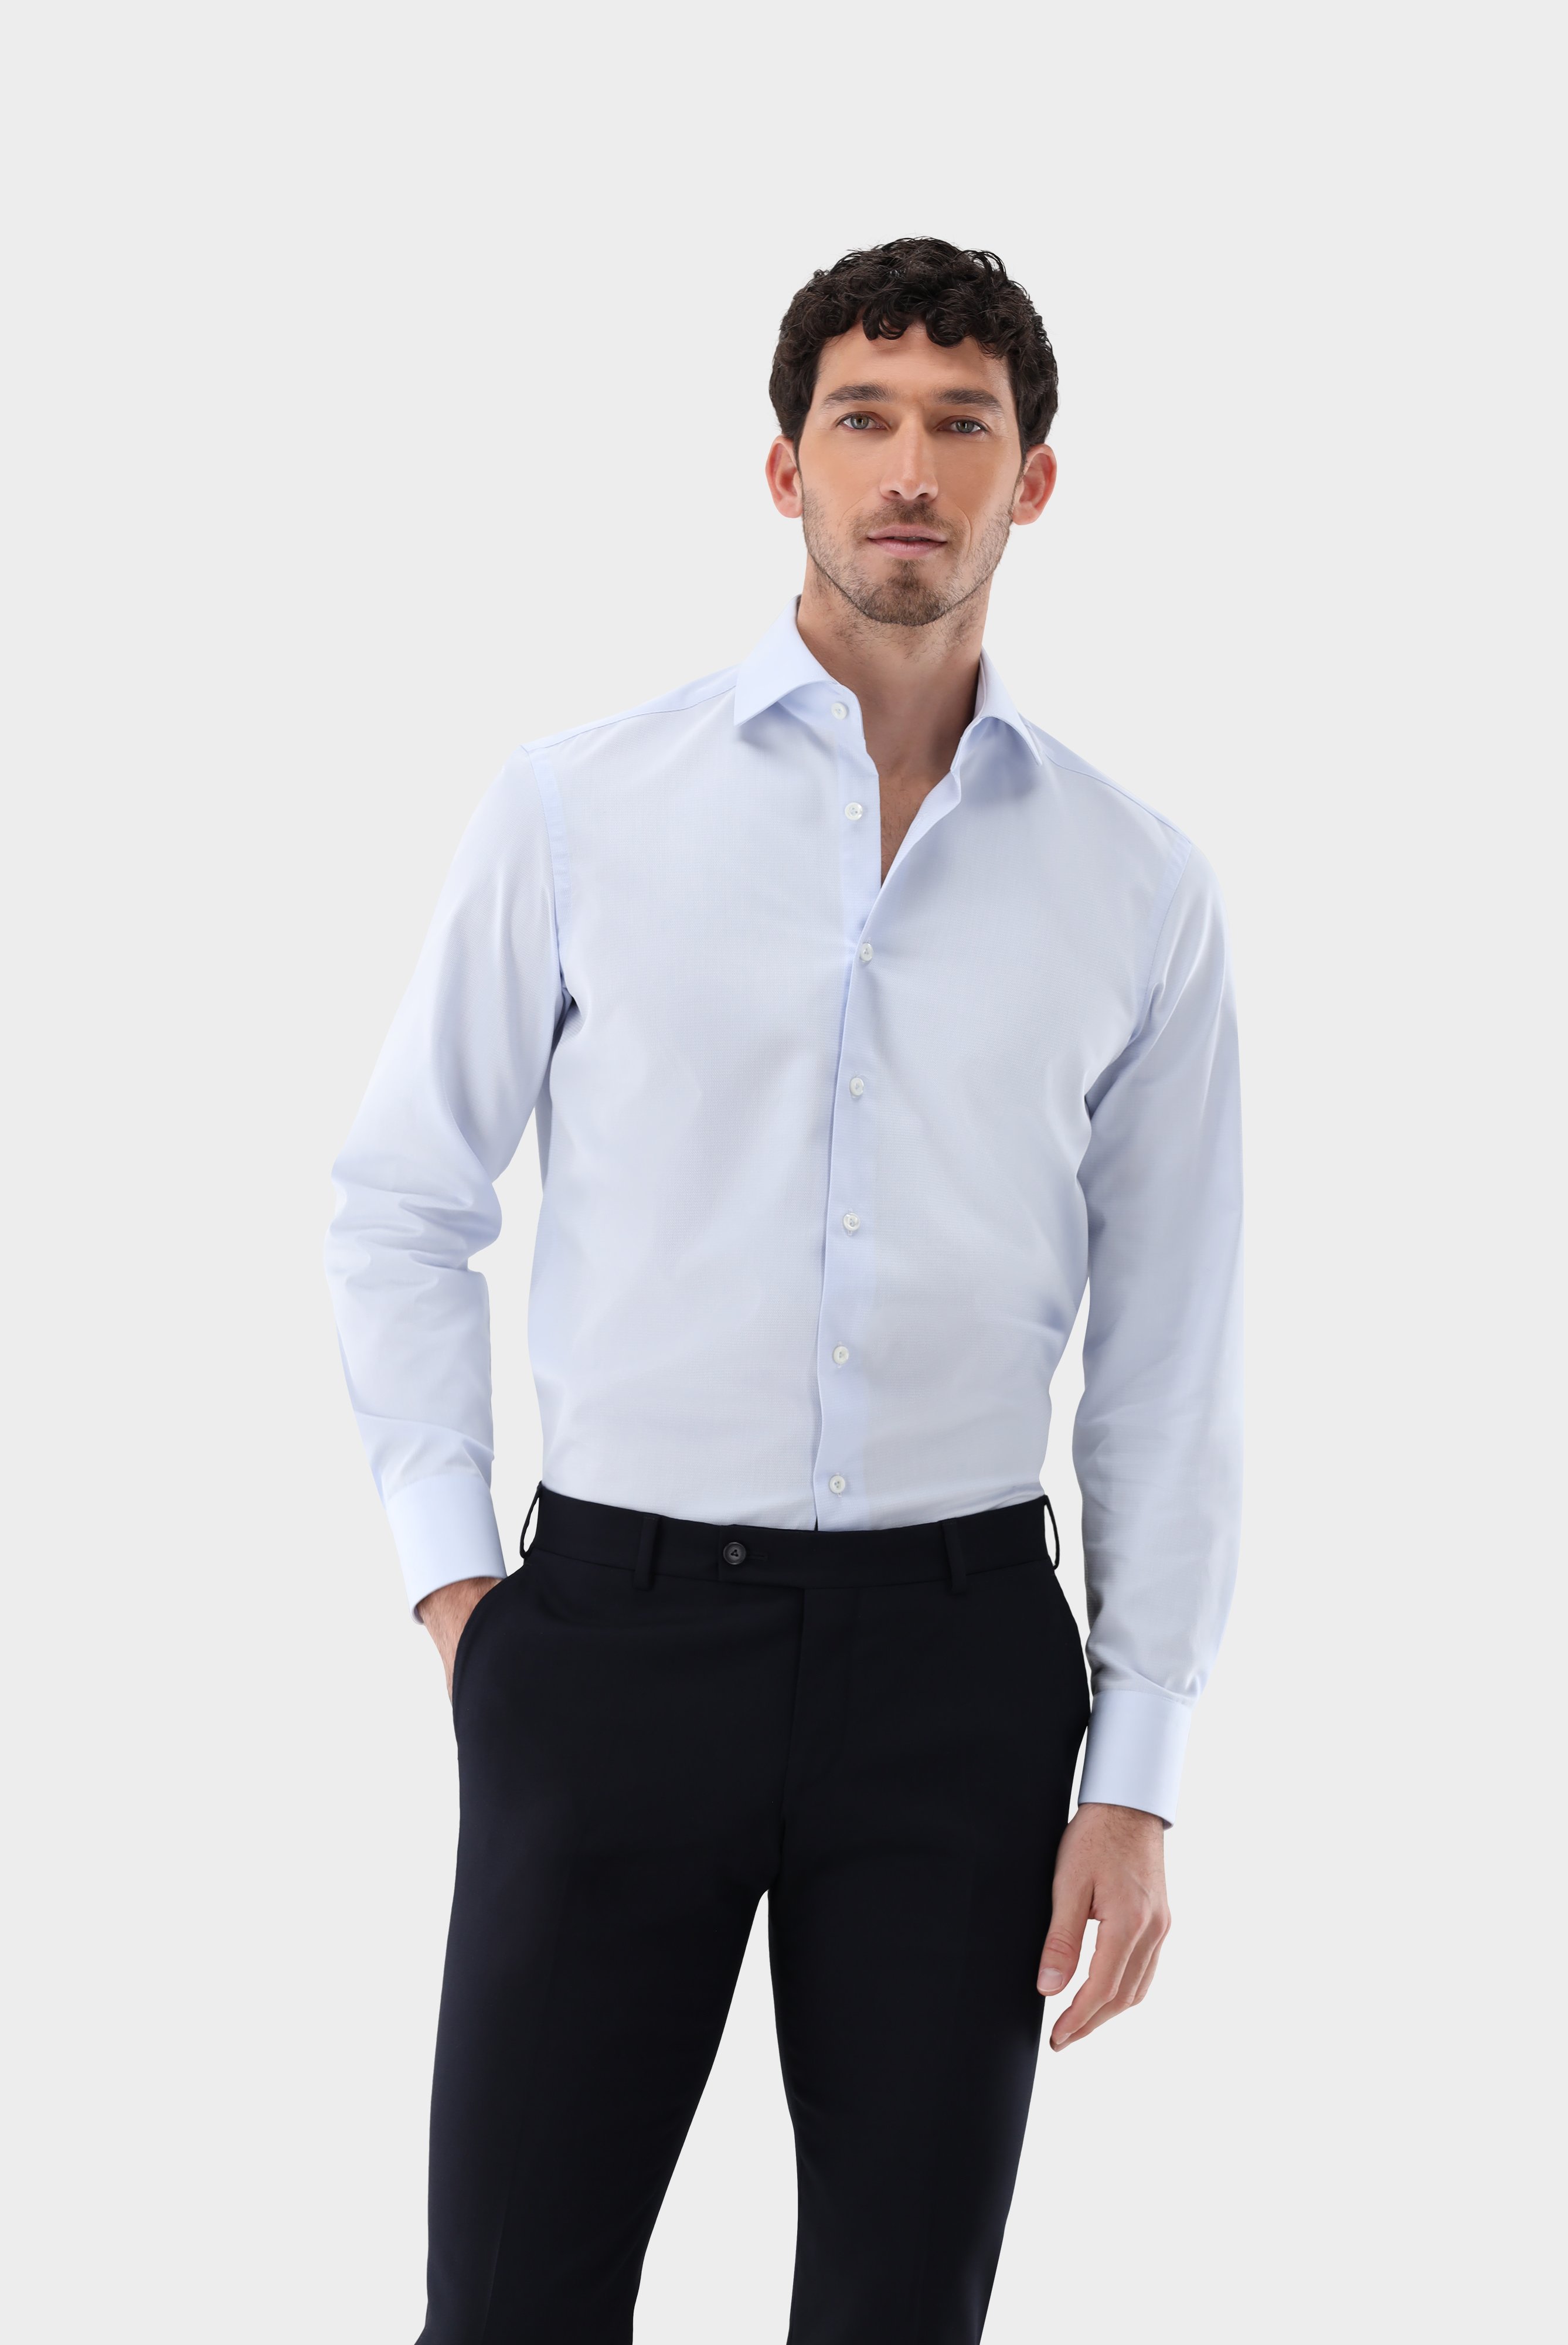 Easy Iron Shirts+Wrinkle Free Twill Shirt with Texture Tailor Fit+20.2020.BQ.150301.720.38